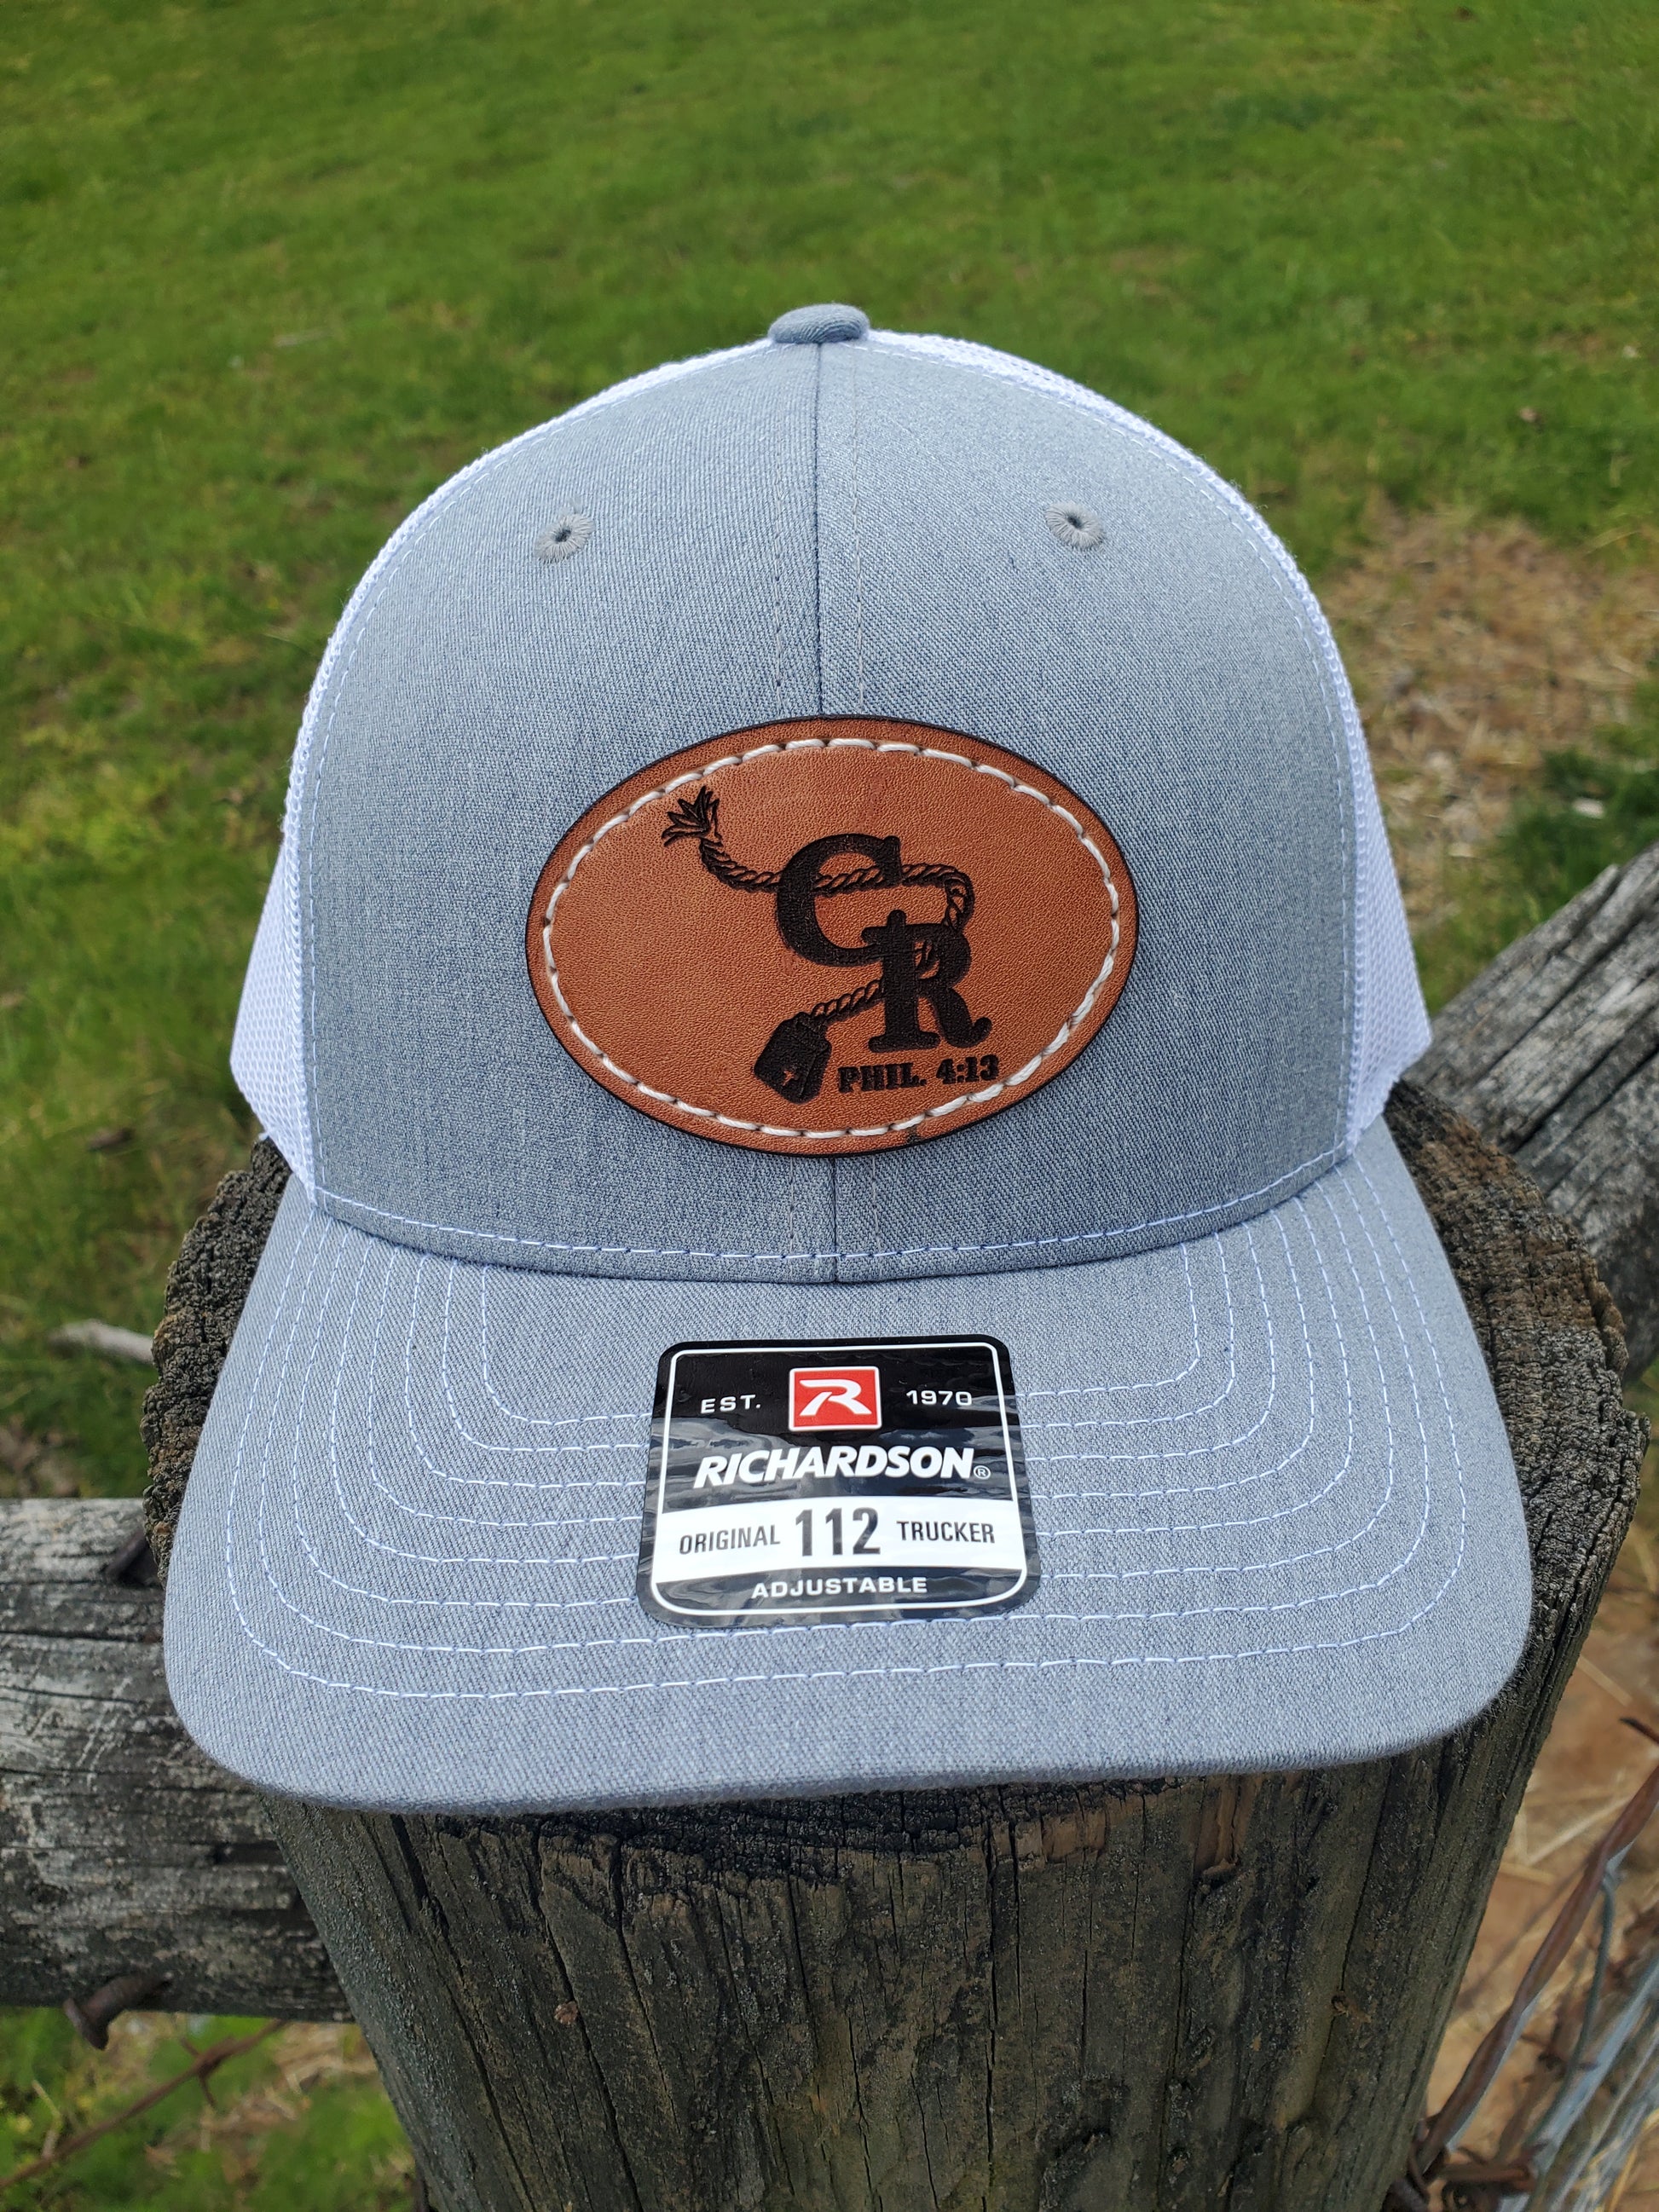 NEW BANDED GEAR FOWL RANGER SNAPBACK CAP HAT OLIVE W/ PATCH LOGO ADJUSTABLE